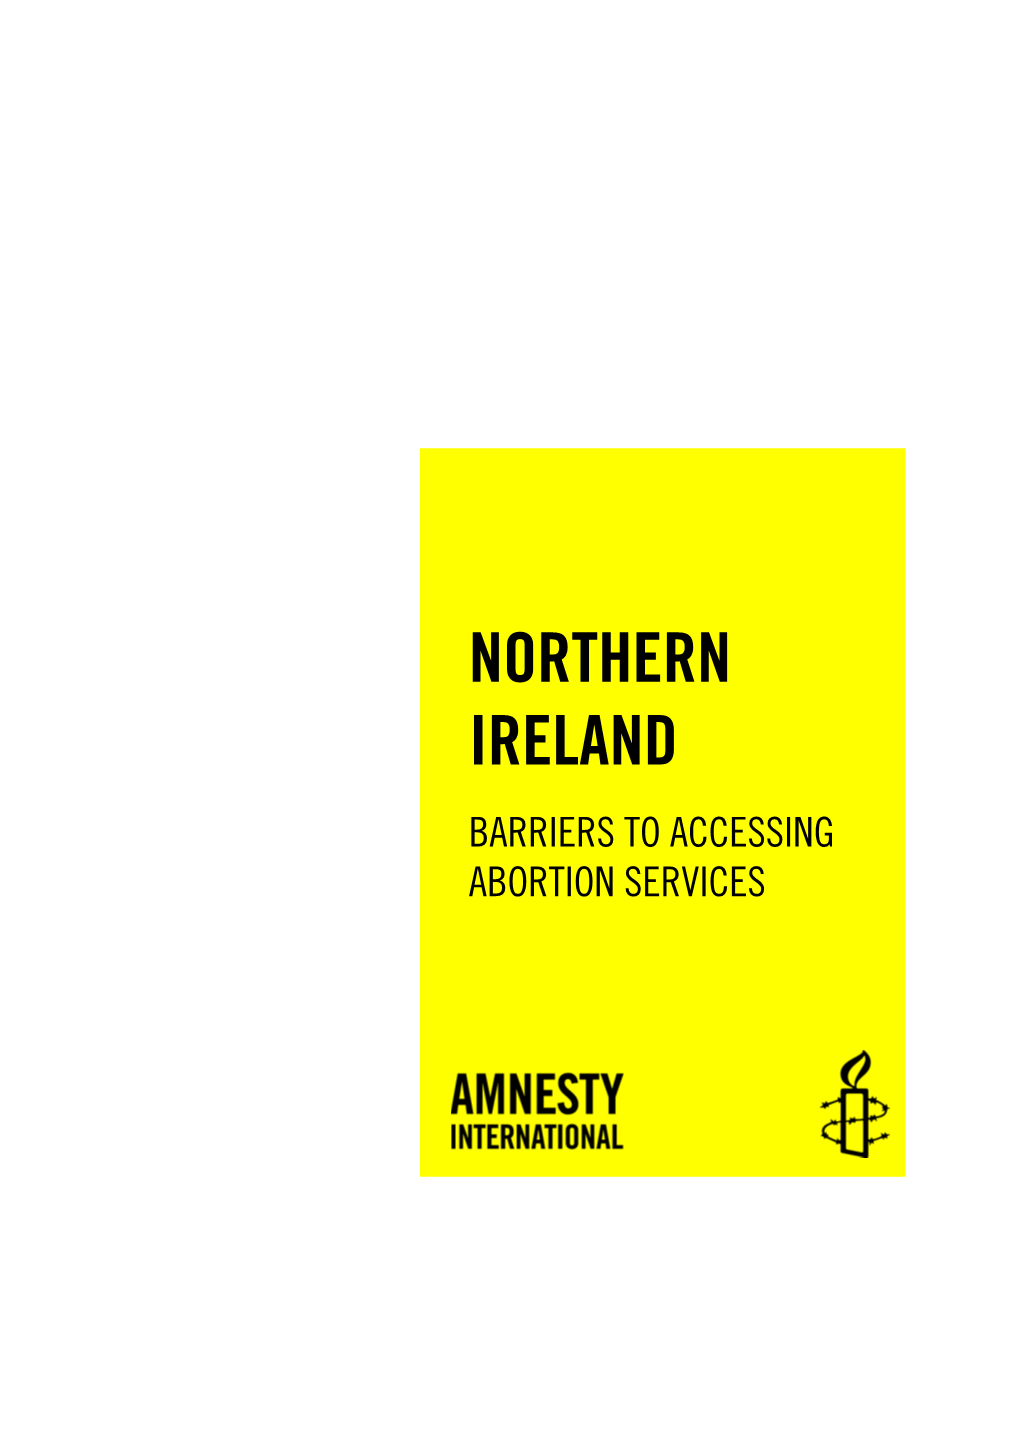 Northern Ireland Barriers to Accessing Abortion Services